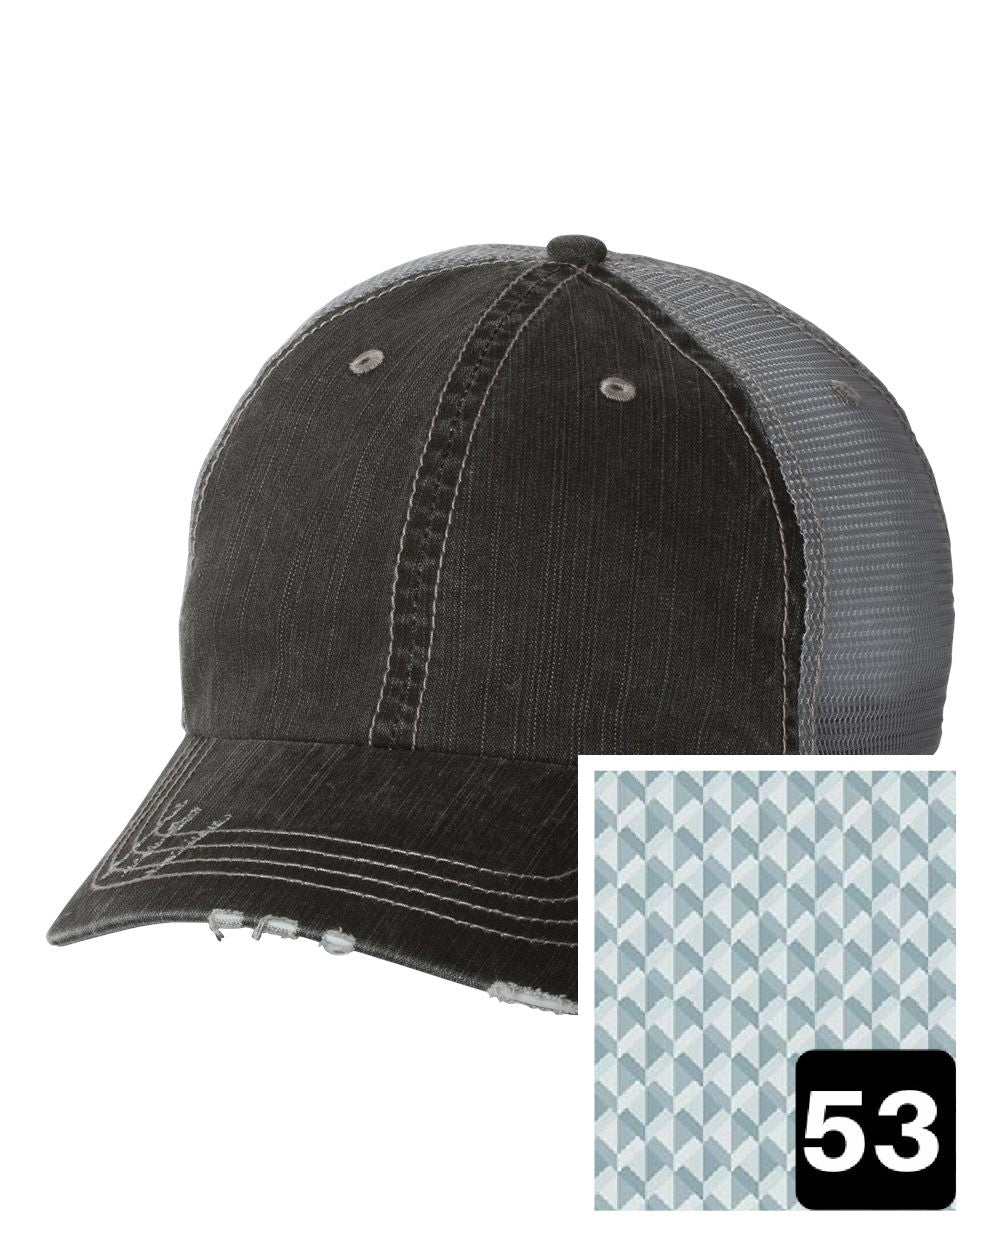 gray distressed trucker hat with multi-color stripe fabric state of Georgia